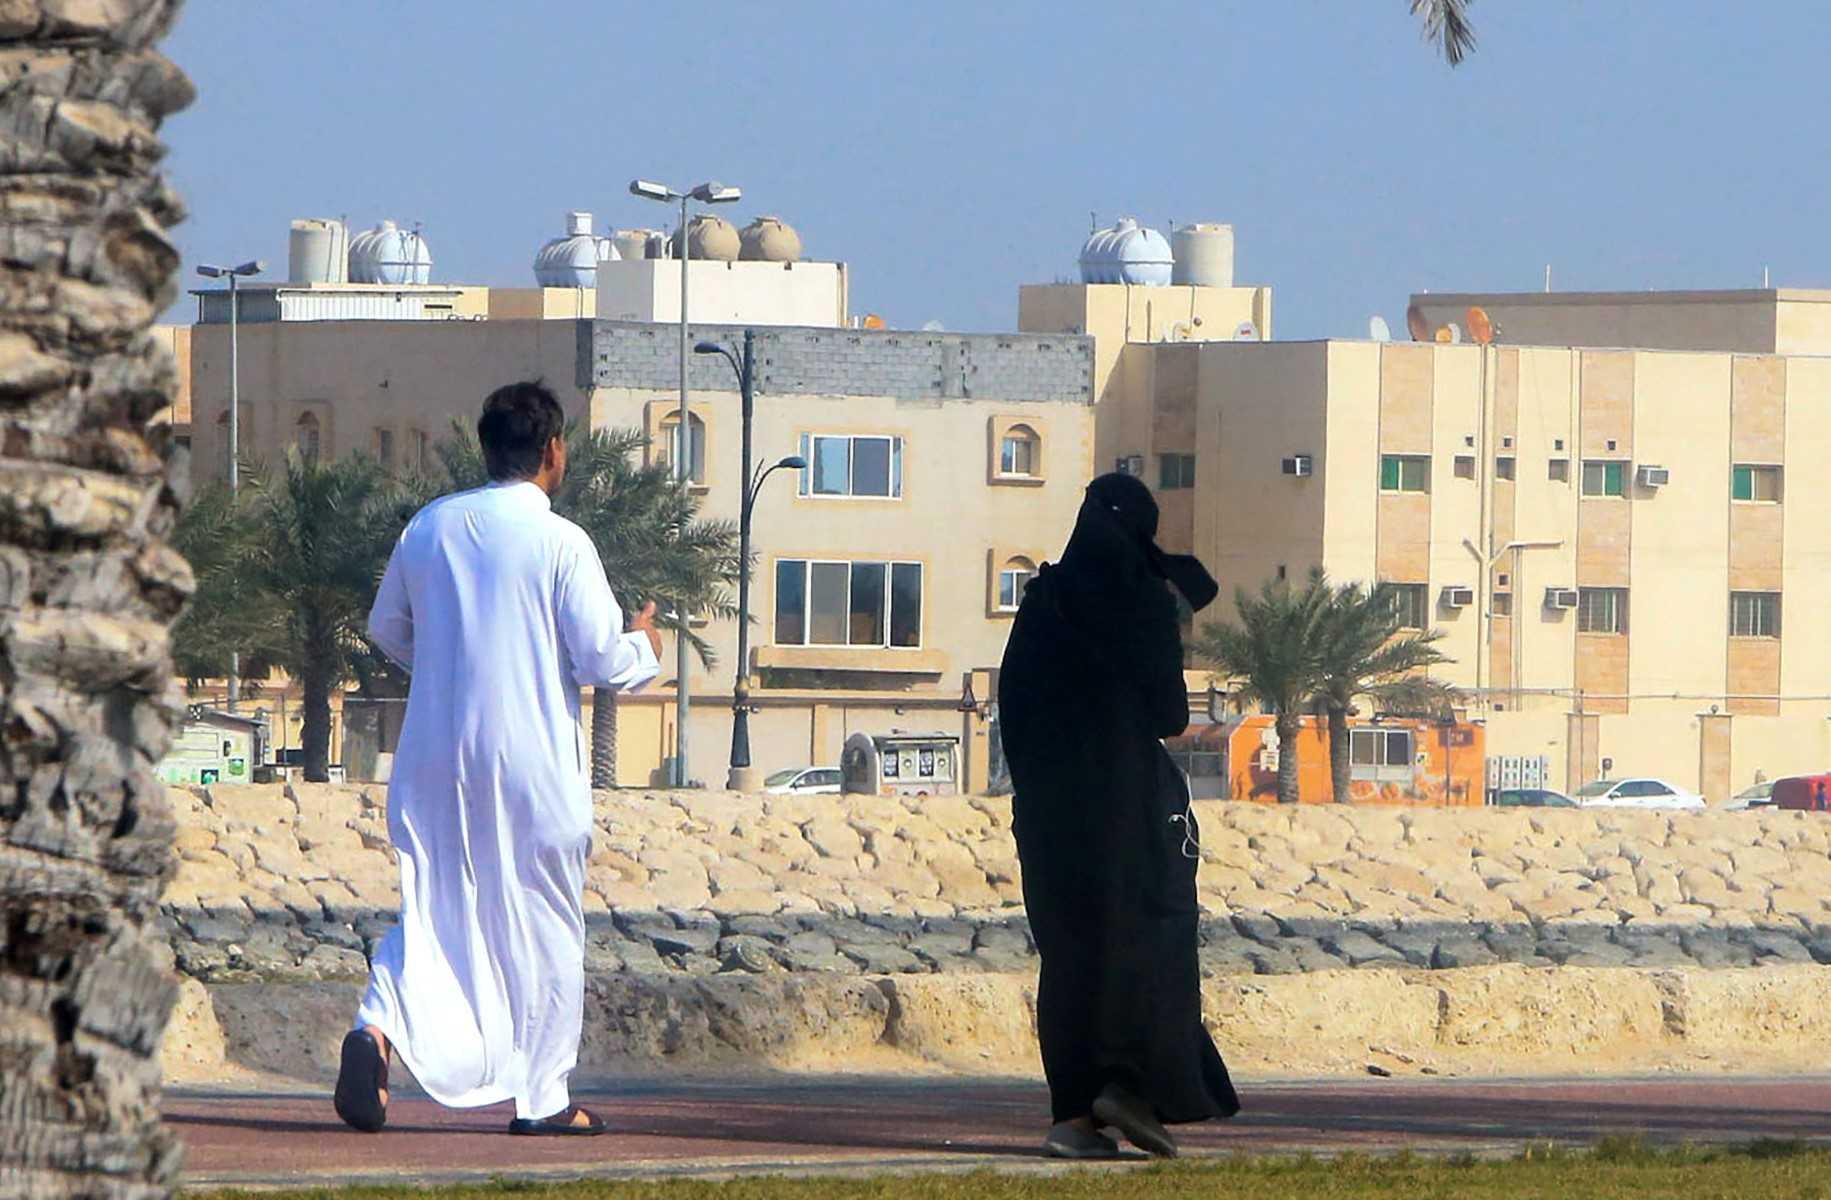 A couple takes a stroll on a sidewalk in Qatif city in Saudi Arabia's Eastern Province, some 400Km from the capital Riyadh, on March 9, 2020. Photo: AFP 